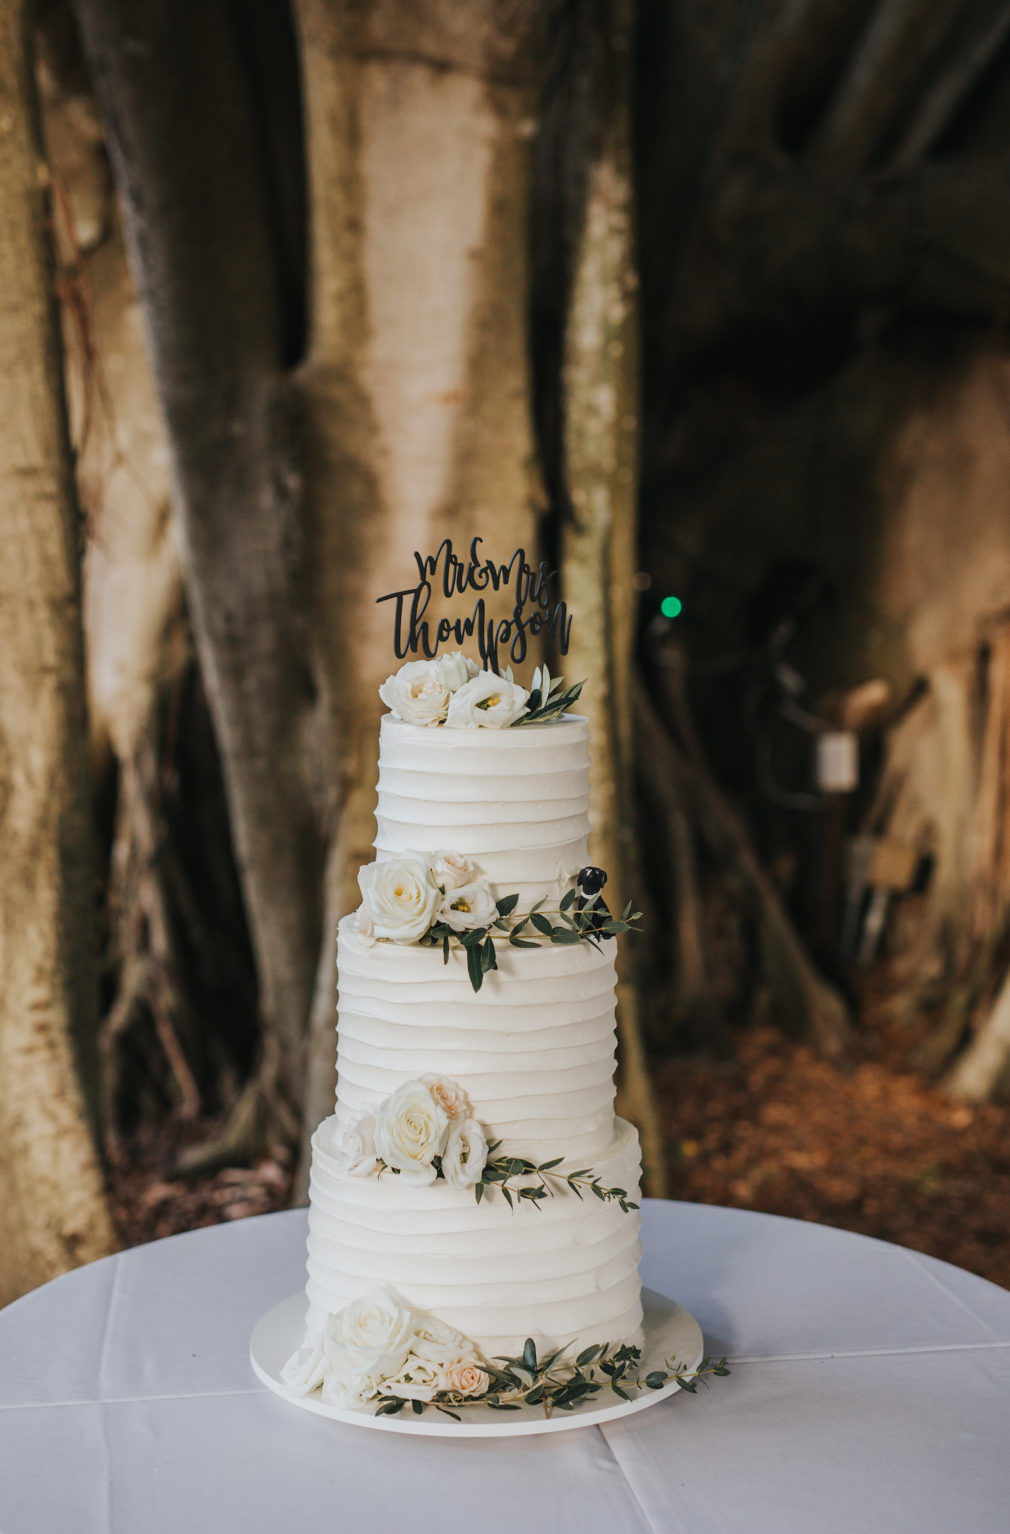 Rustic Three Tiered Round Frosted Icing Wedding Cake, White Flower Details and Greenery, and Black Mr. & Mrs. Cake Topper